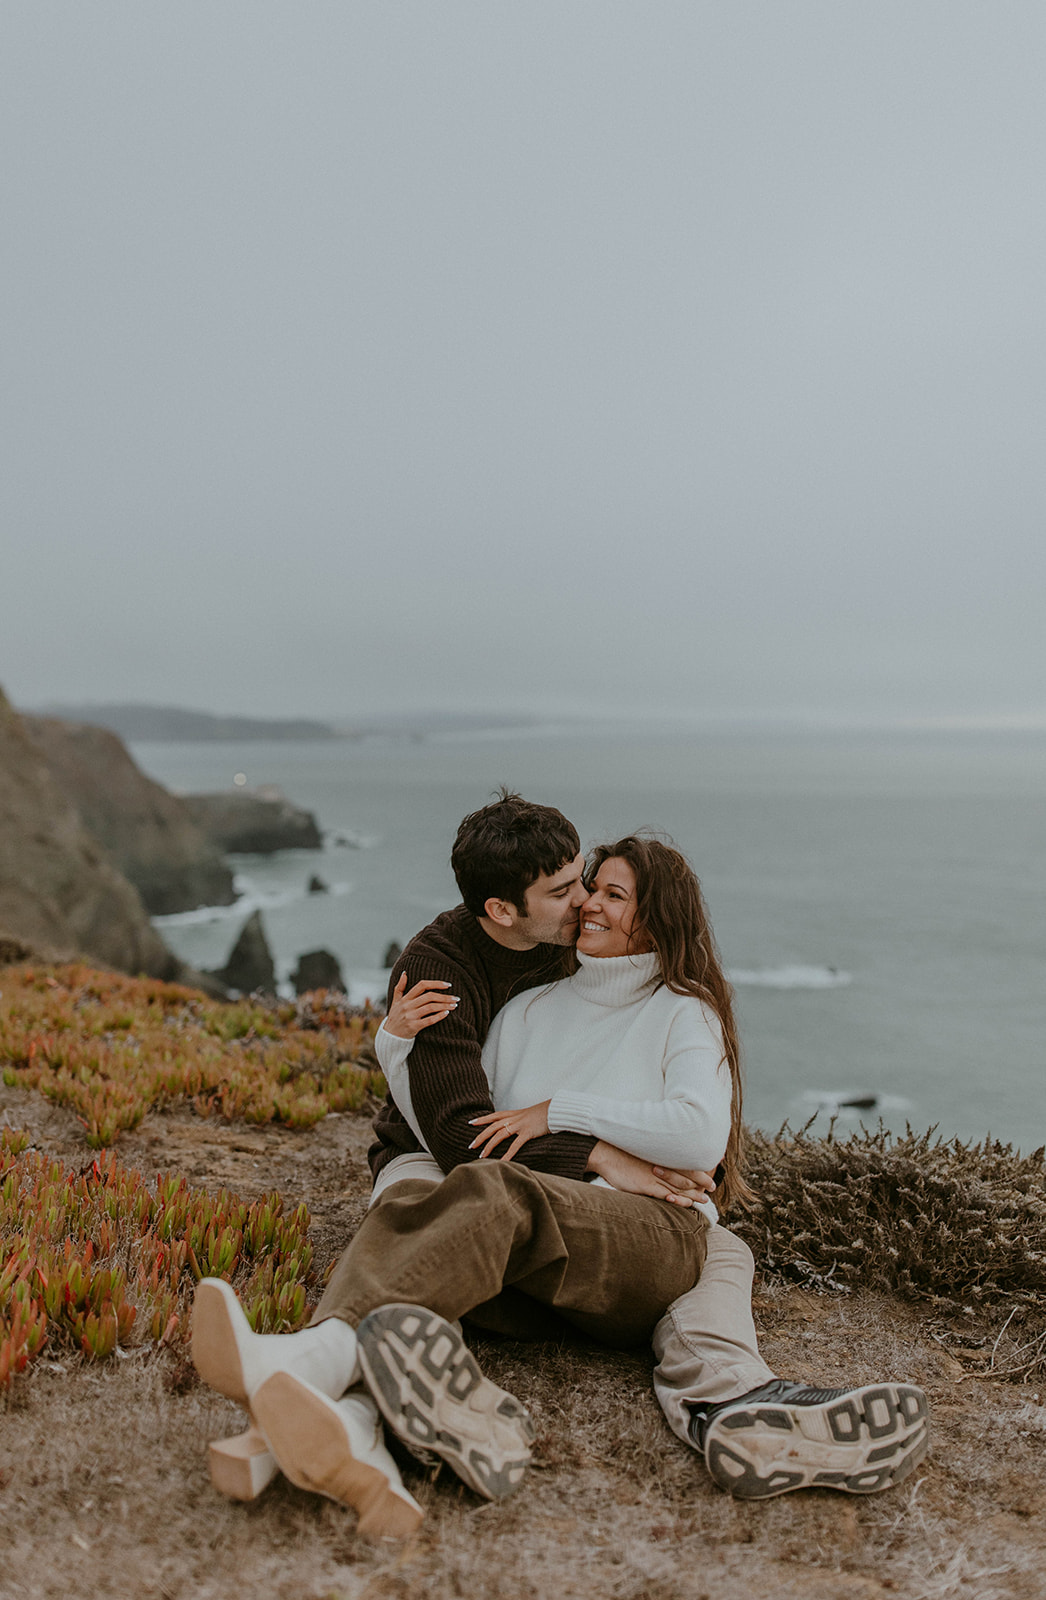 cute poses for engagement photos, winter engagement photos, beach engagement photos, winter engagement photo outfits. Photo taken by Codi Baer Photography 